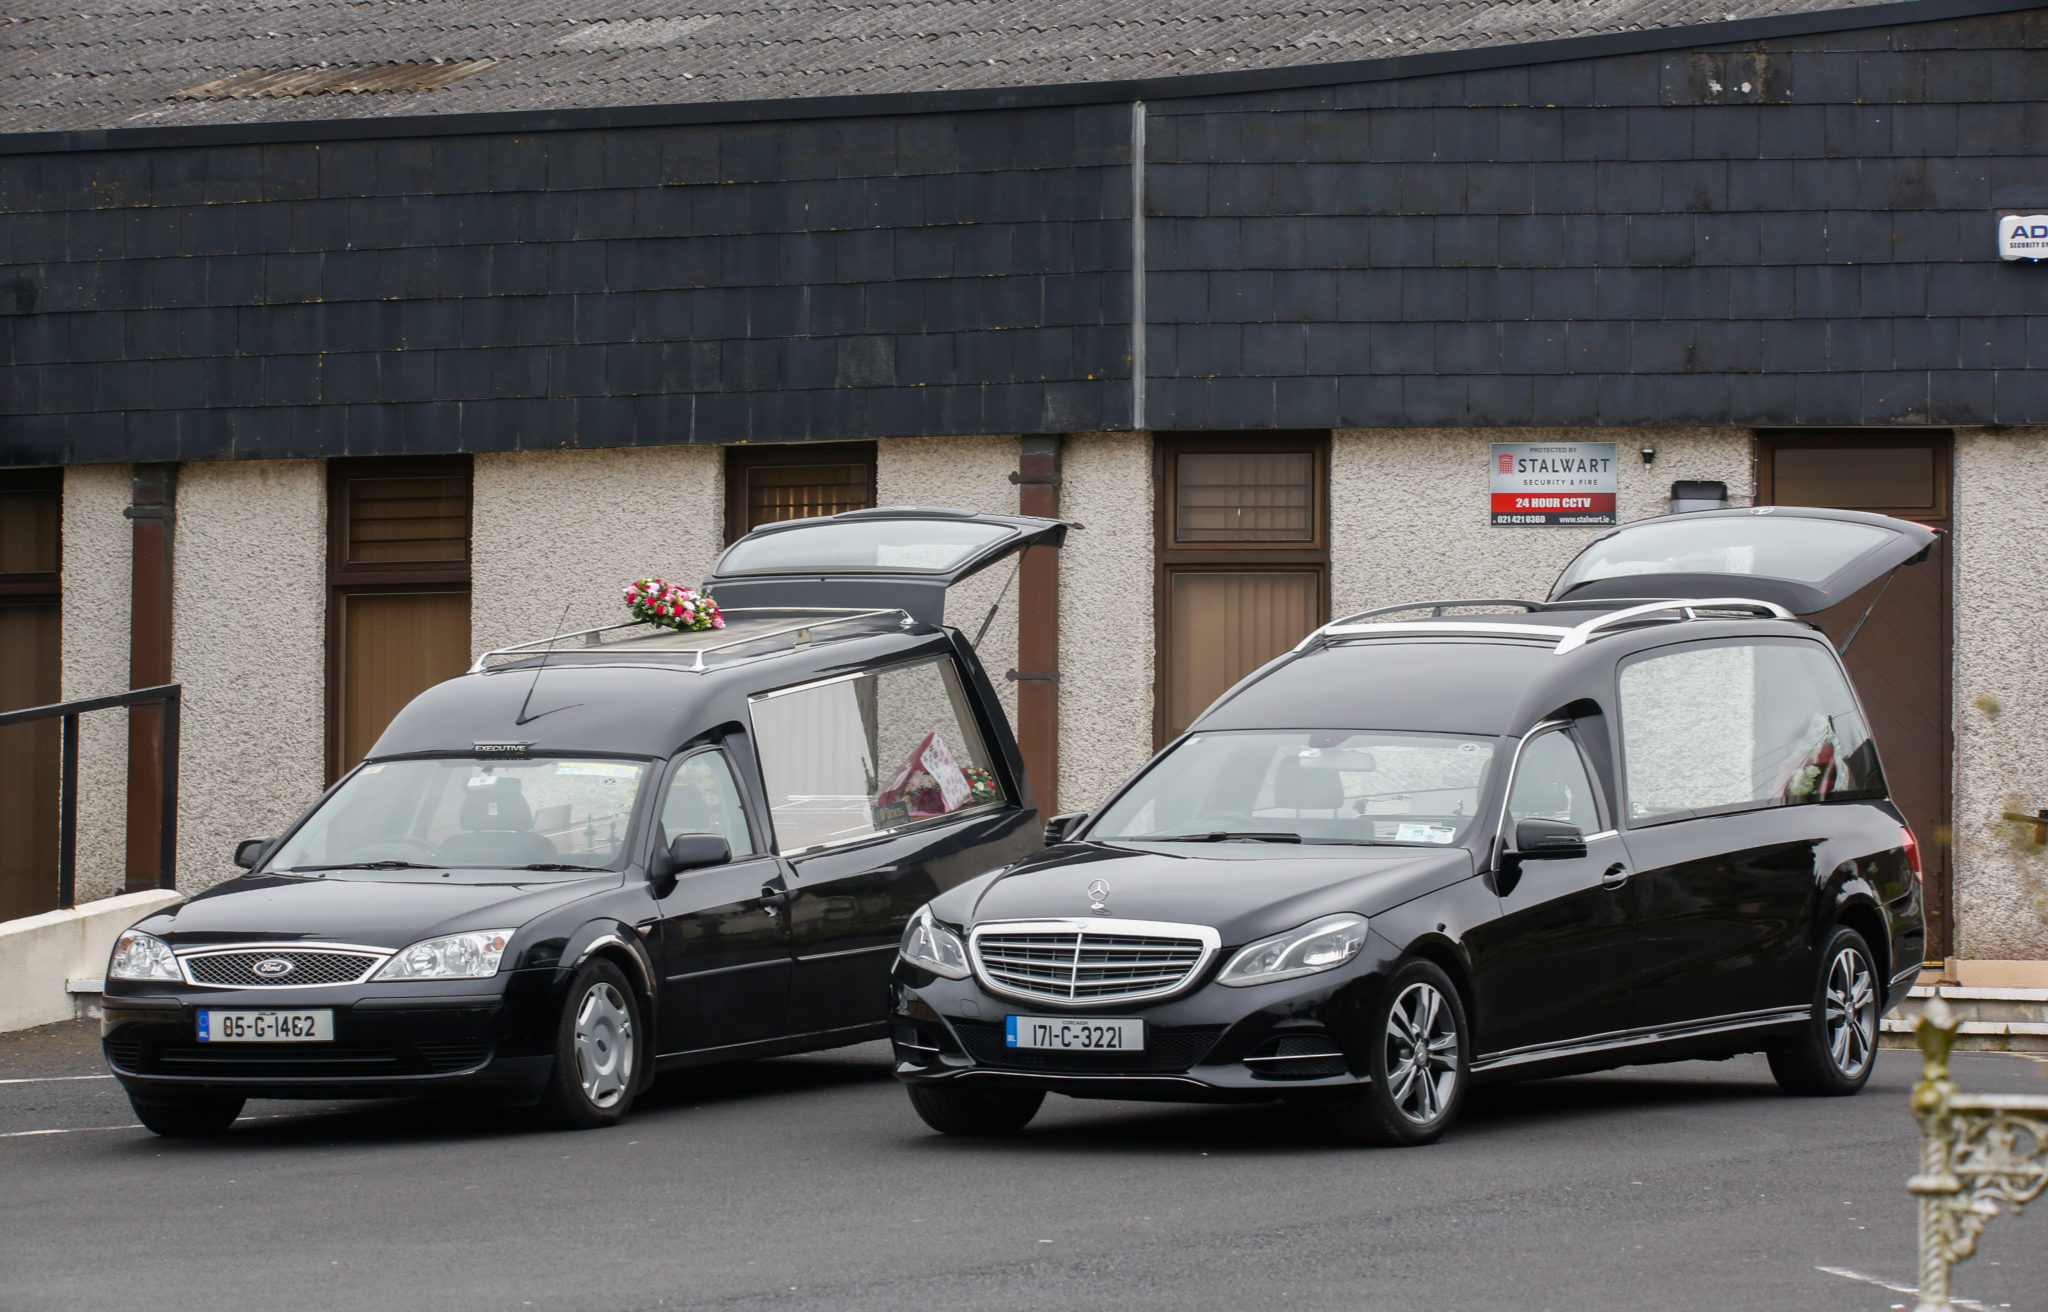 Hearses parked outside the funerals of Willie and Patrick Hennessy at the Church of Our Lady Conceived Without Sin in Mitchelstown, Cork, 04-03-2021. Image: RollingNews